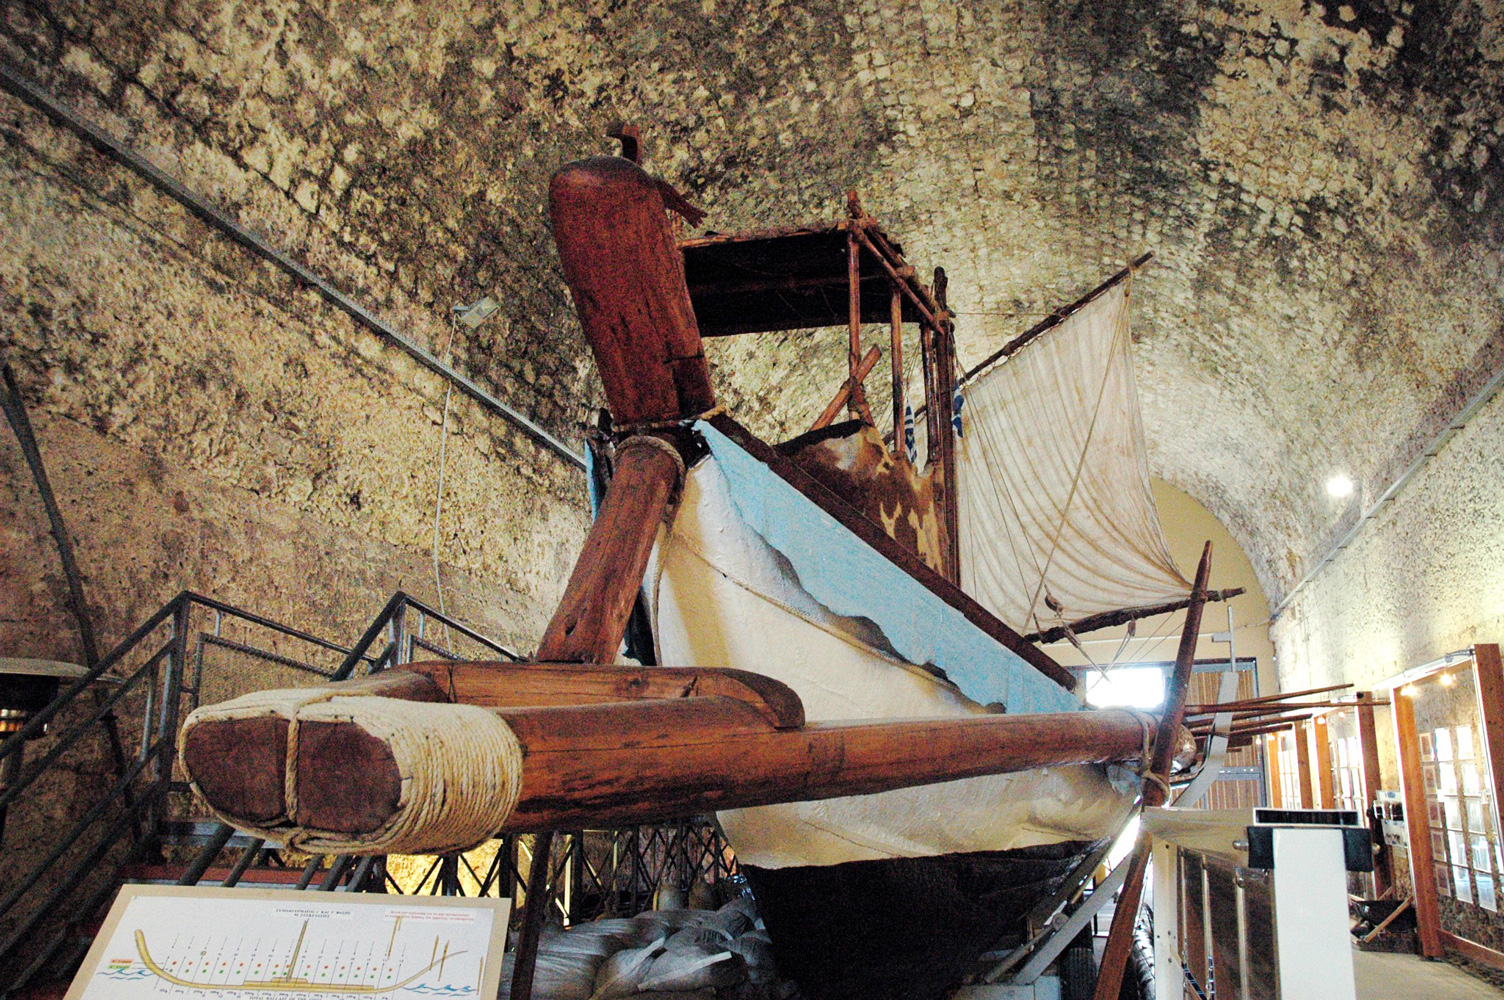 The Minoan Ship from below inside the storage room